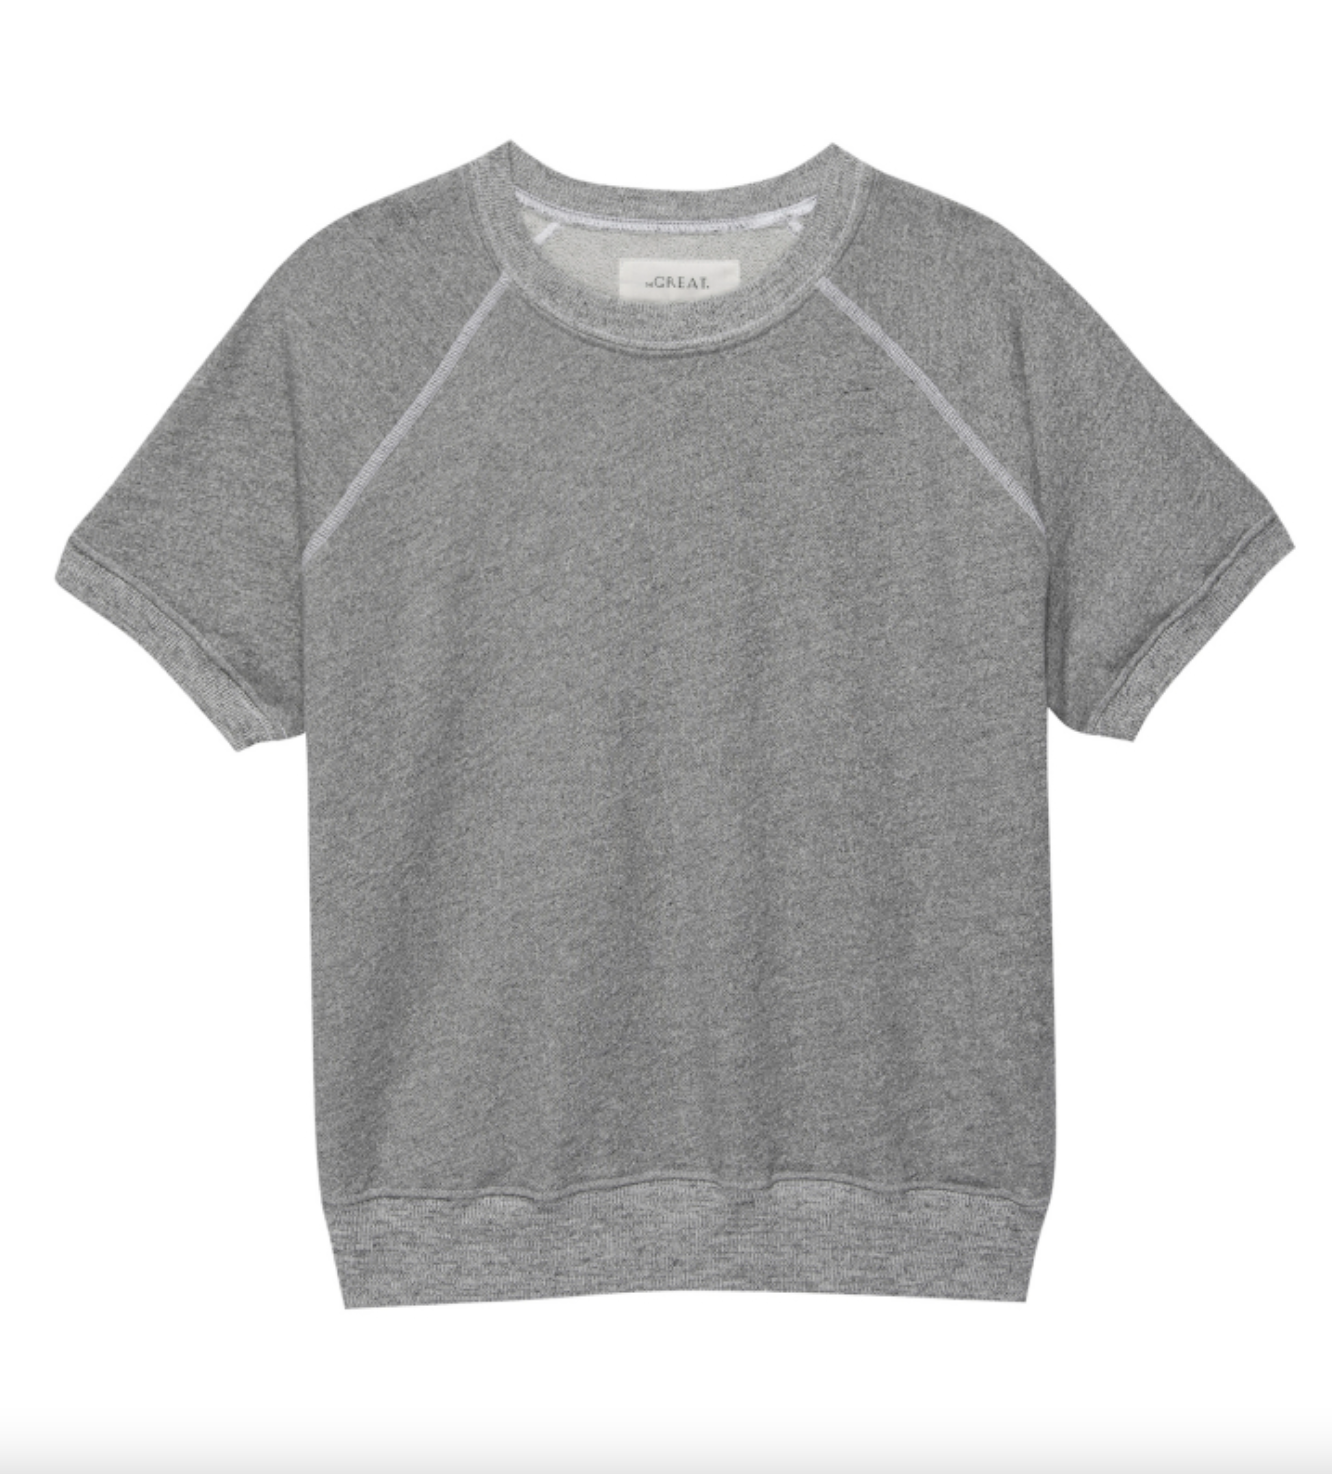 The Short Sleeve Sweatshirt Varsity Grey displayed on a plain background, featuring short sleeves and visible seam stitching at the shoulders, perfect for a casual outing in Scottsdale, Arizona by The Great Inc.